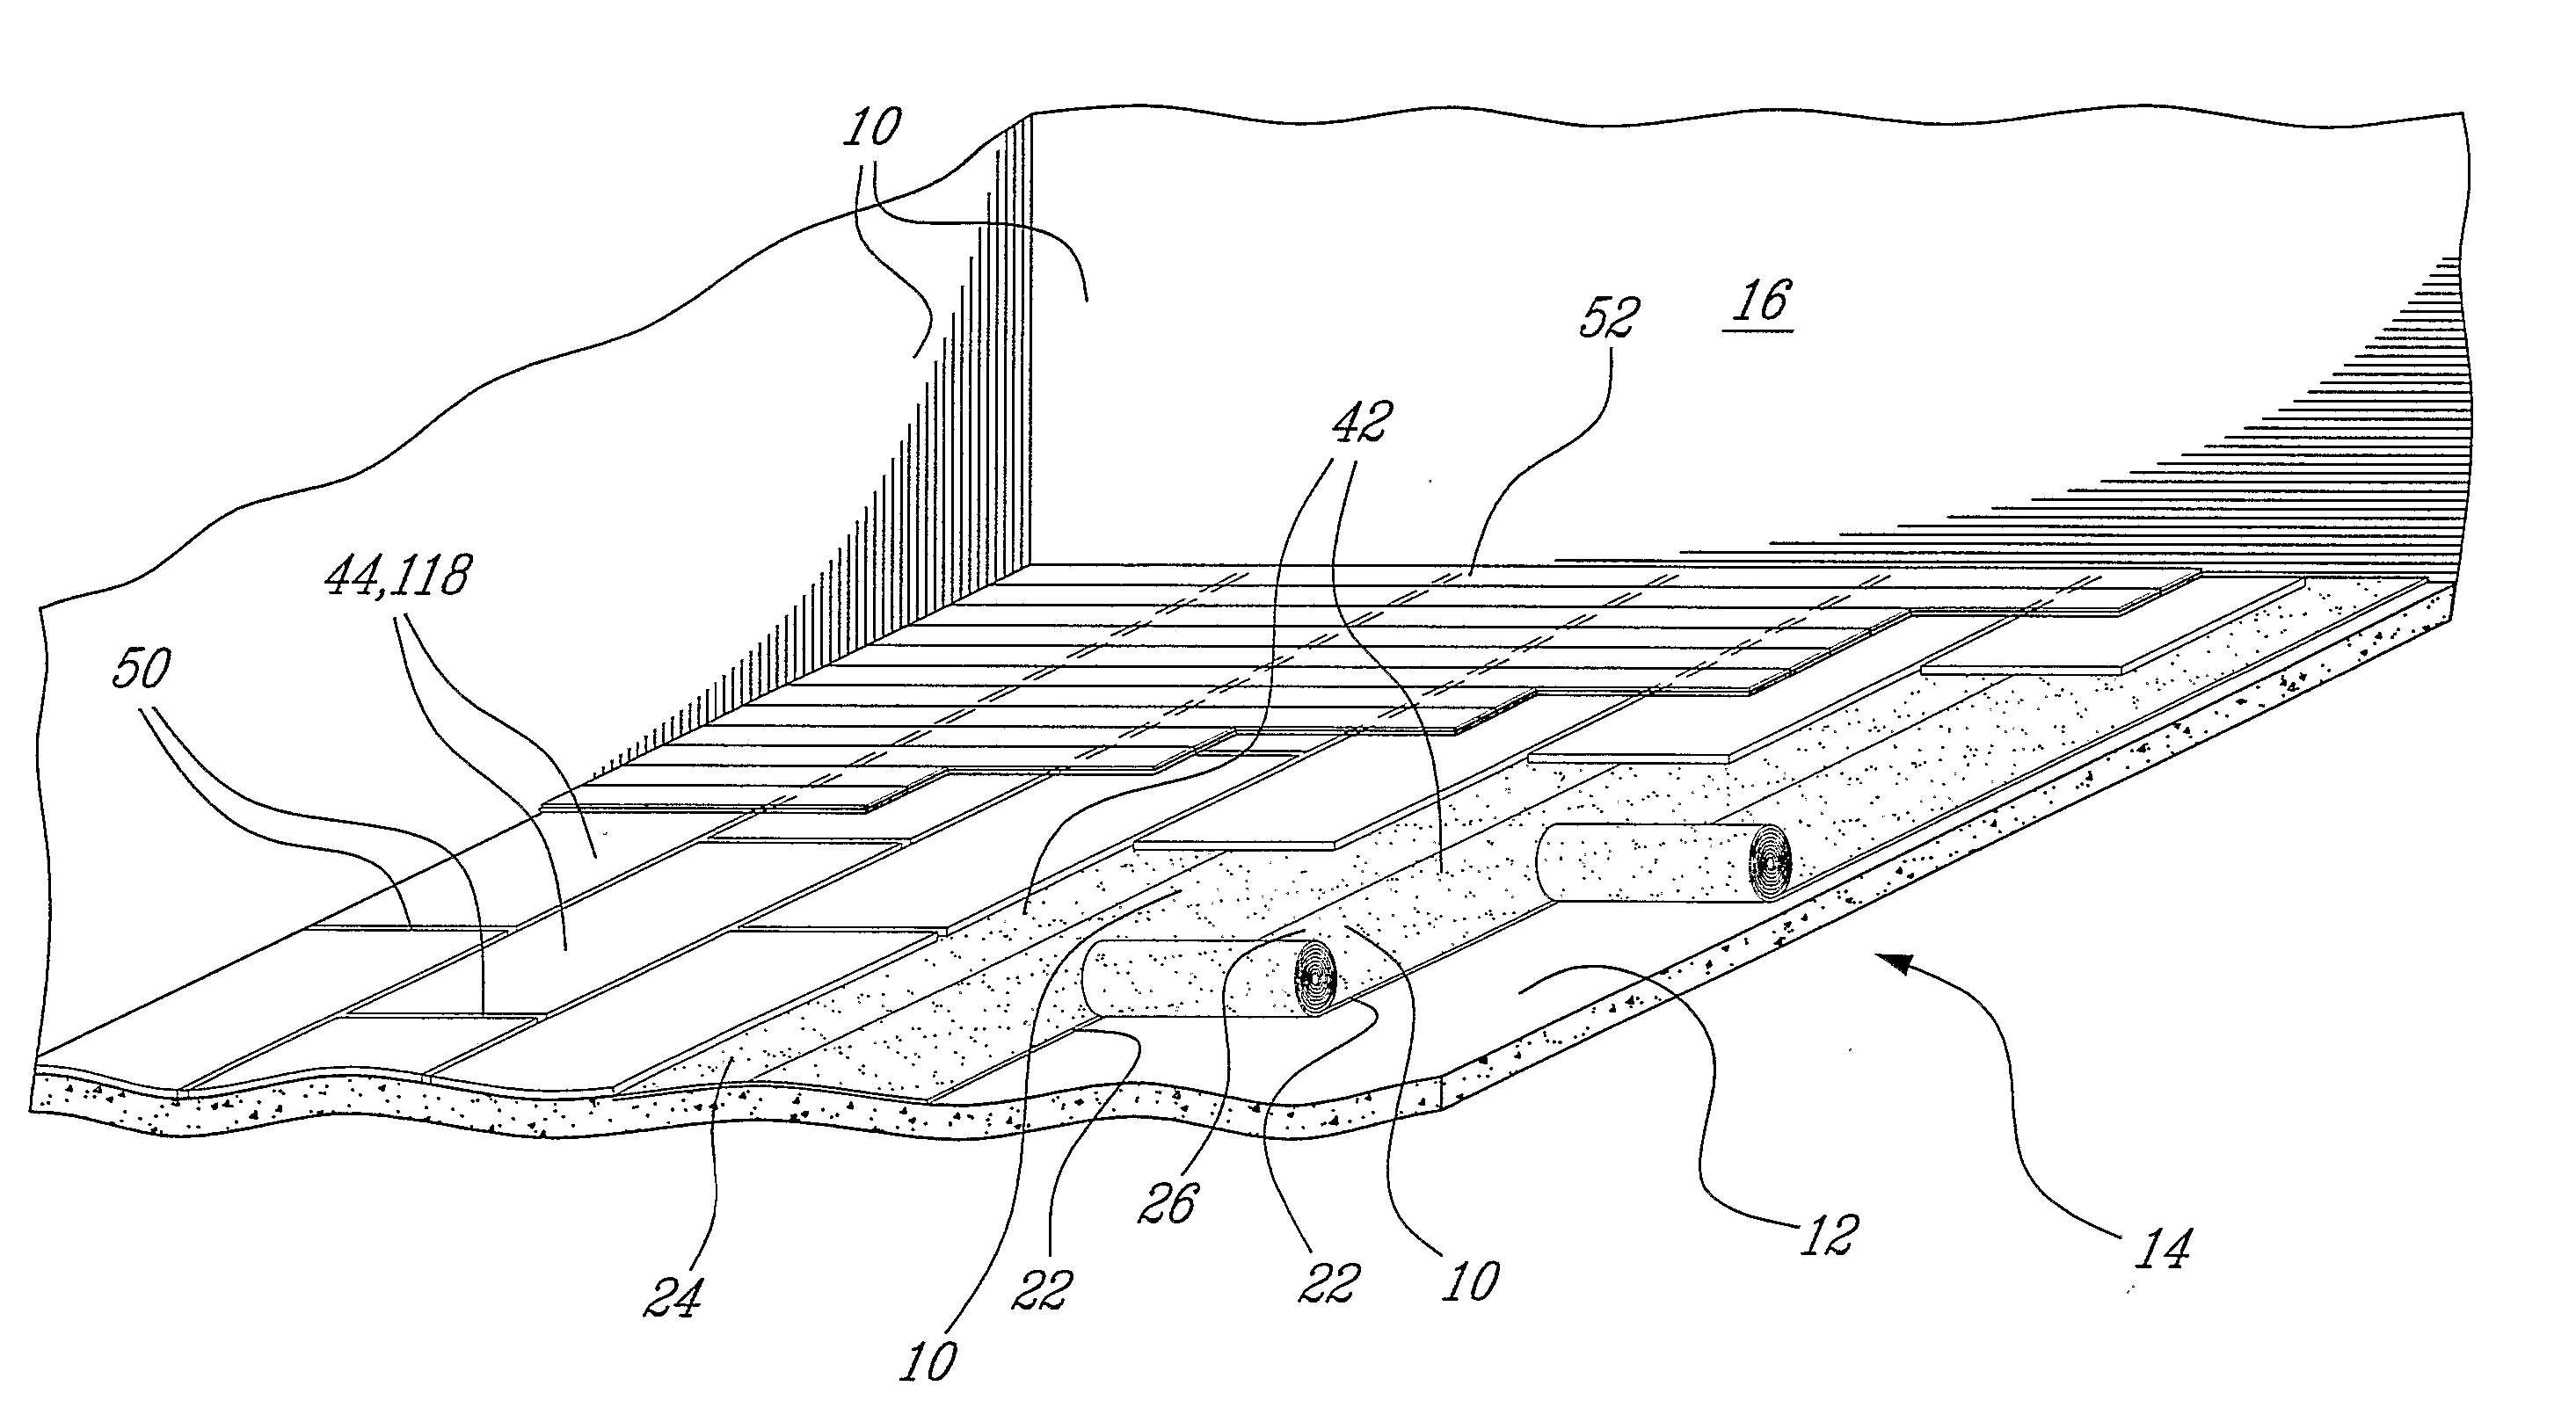 Flooring system and method of installing same